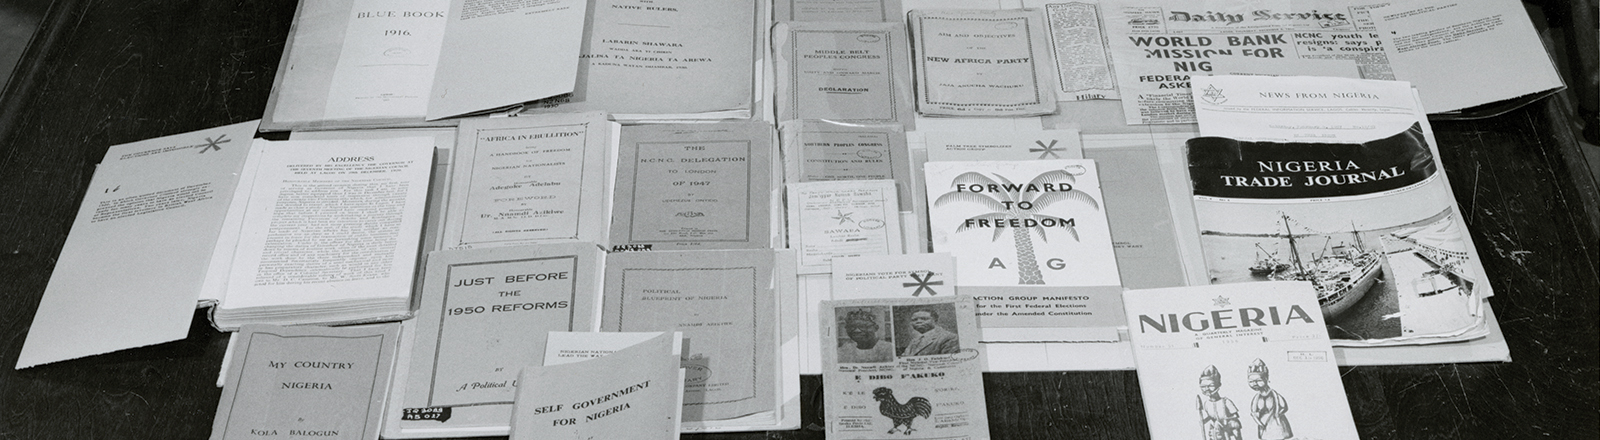 A black and white photo of a display of Hoover library materials about Nigeria, circa 1960